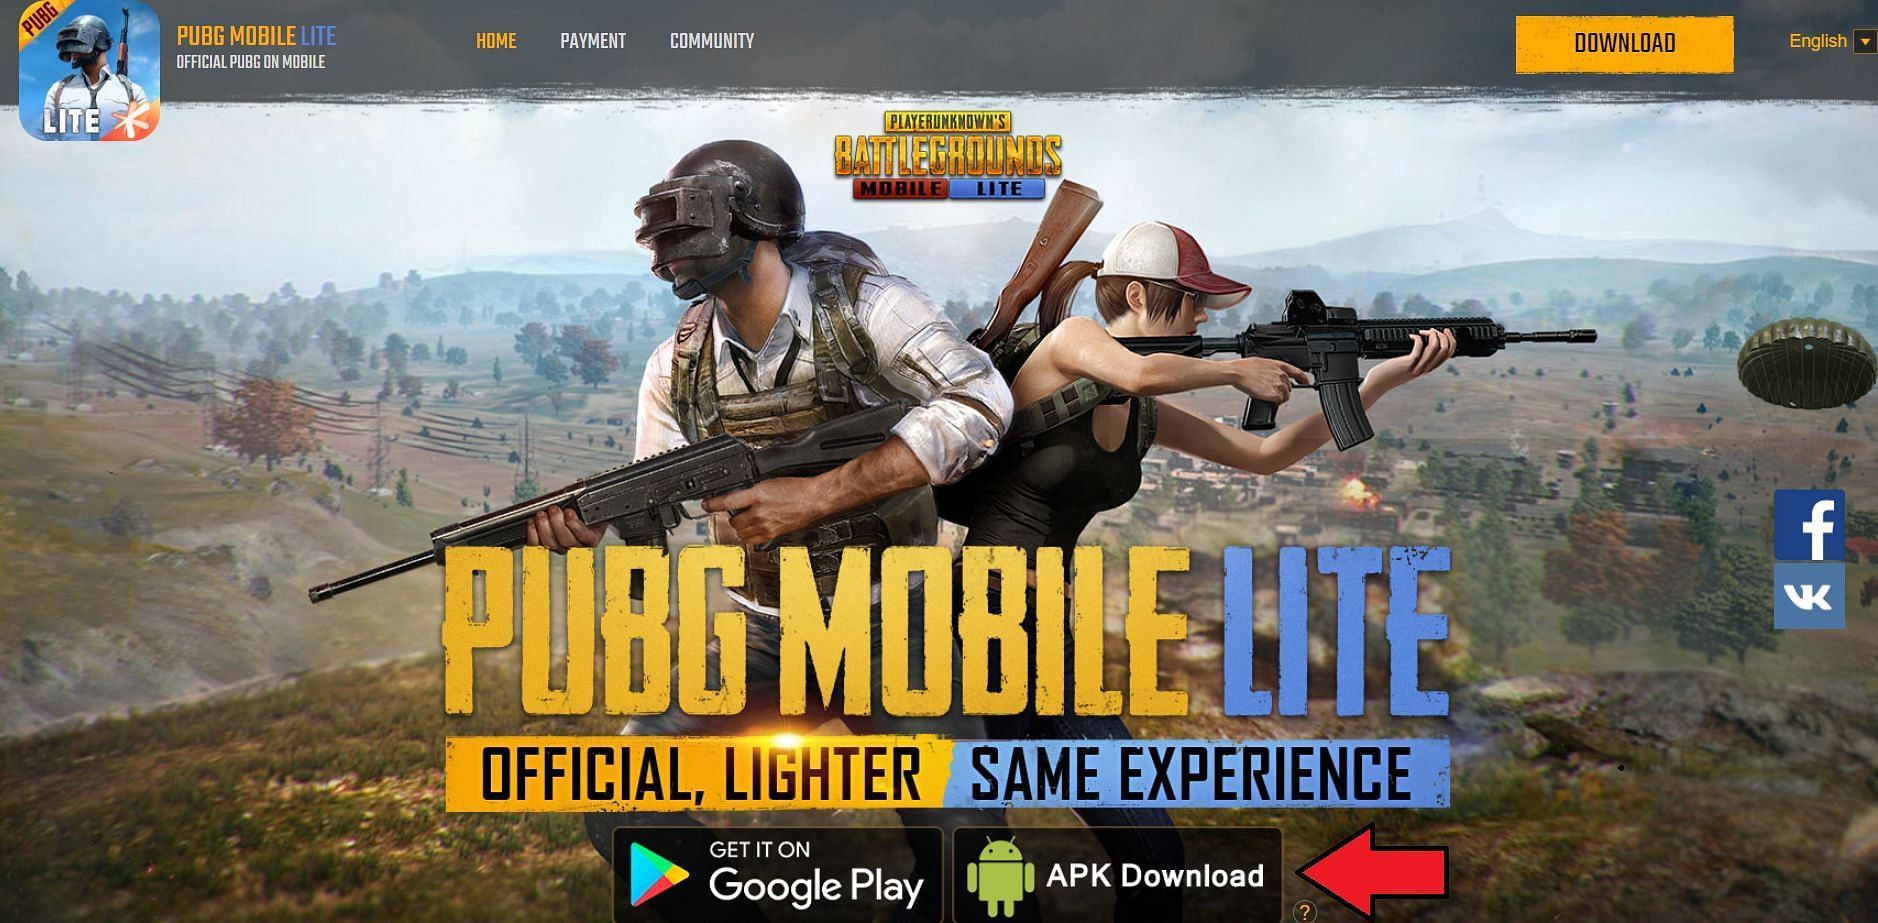 Pressing this option will start the download for the APK file (Image via PUBG Mobile Lite)